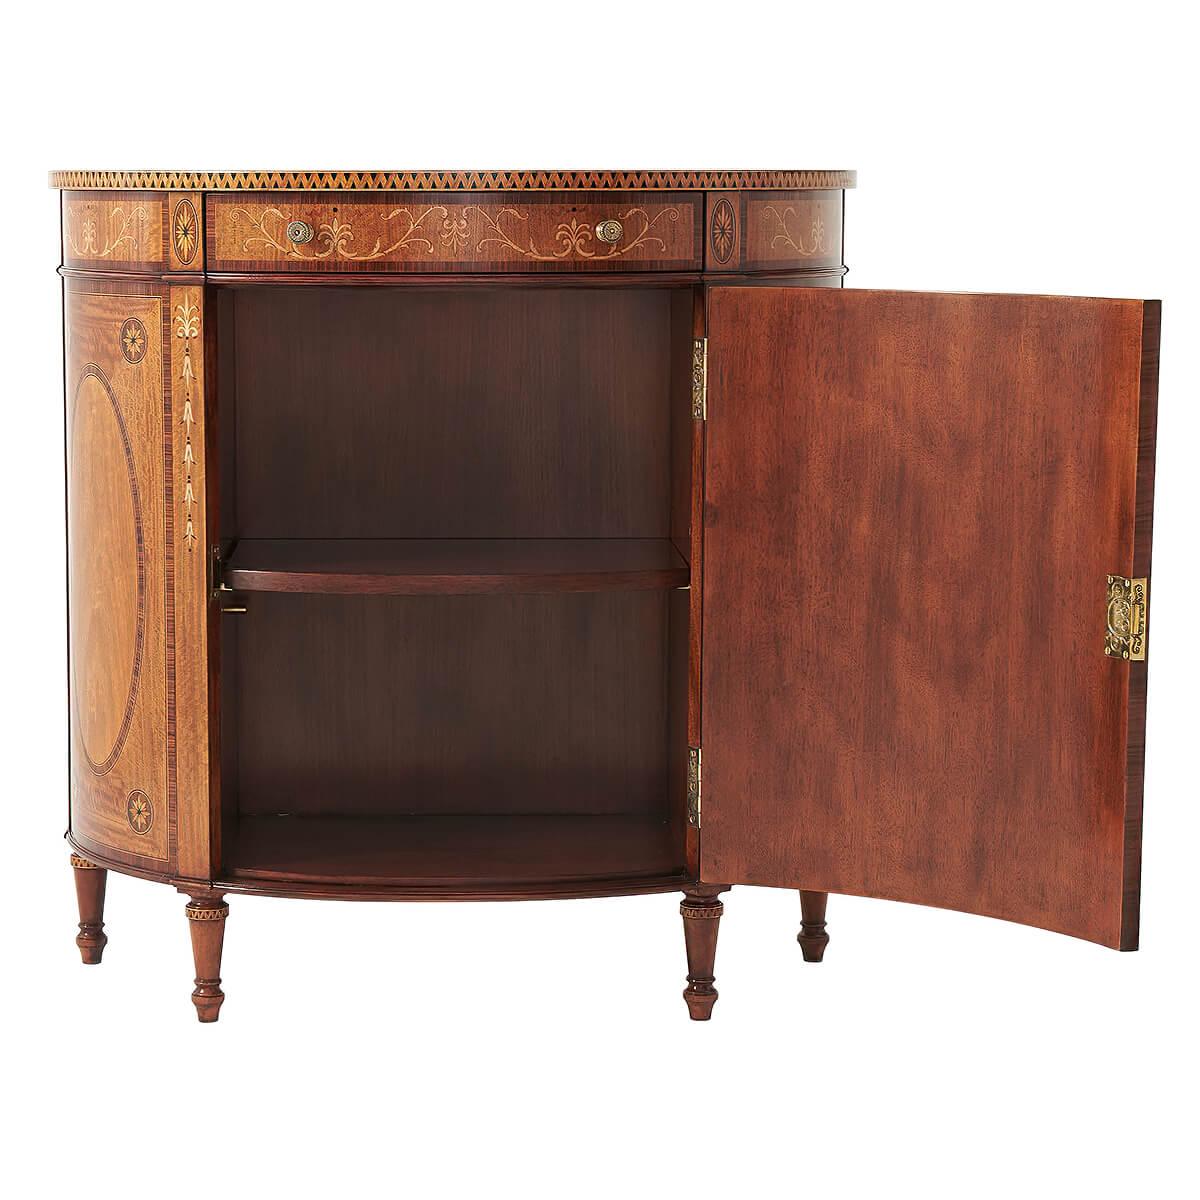 A fine satinwood, rosewood banded and sycamore marquetry inlaid demilune side cabinet, the fine leaf and fan inlaid top above an anthemion and honeysuckle inlaid frieze with a drawer, above a classical yew burl inlaid urn and oval walnut banded